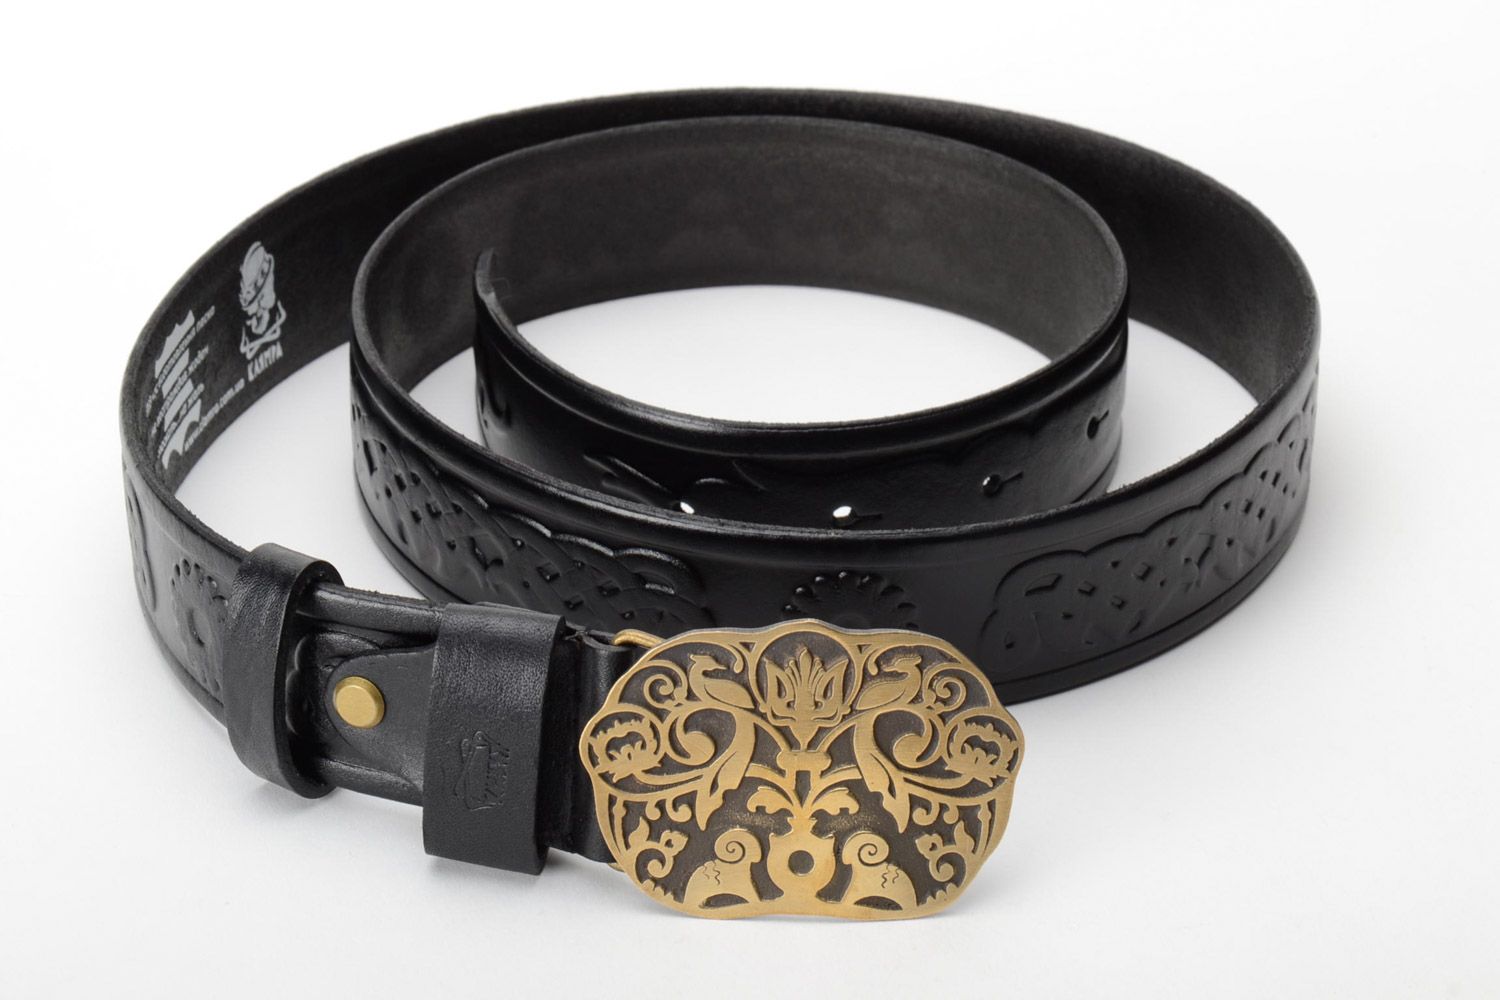 Handmade genuine leather belt with metal buckle and embossment in the shape of vignettes photo 2